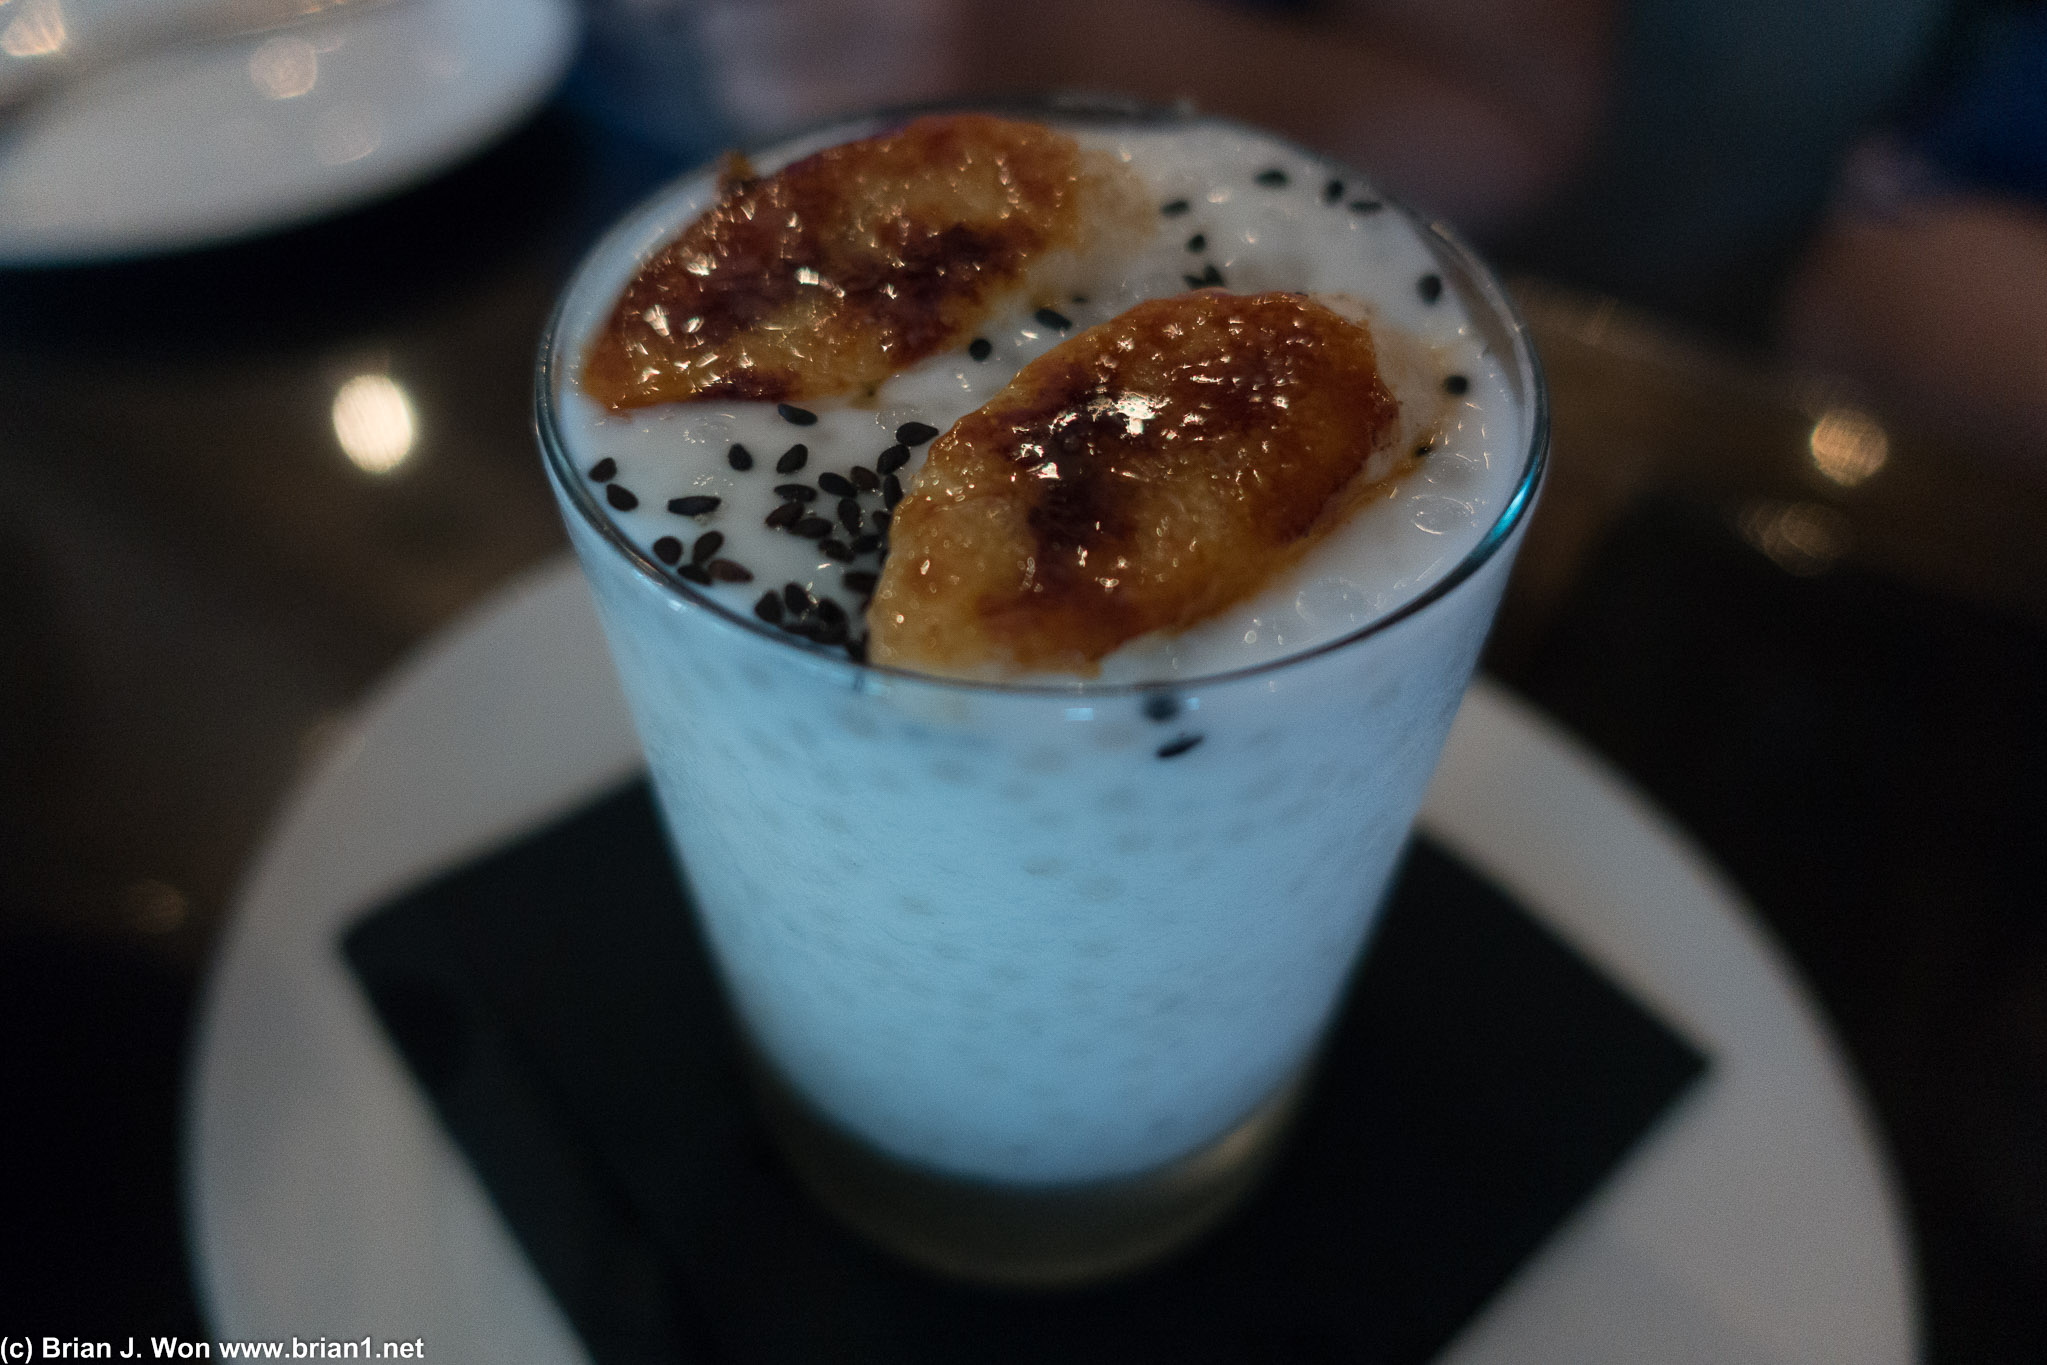 Banana tapioca. Not bad, and hidden inside was a dollop of ice cream!